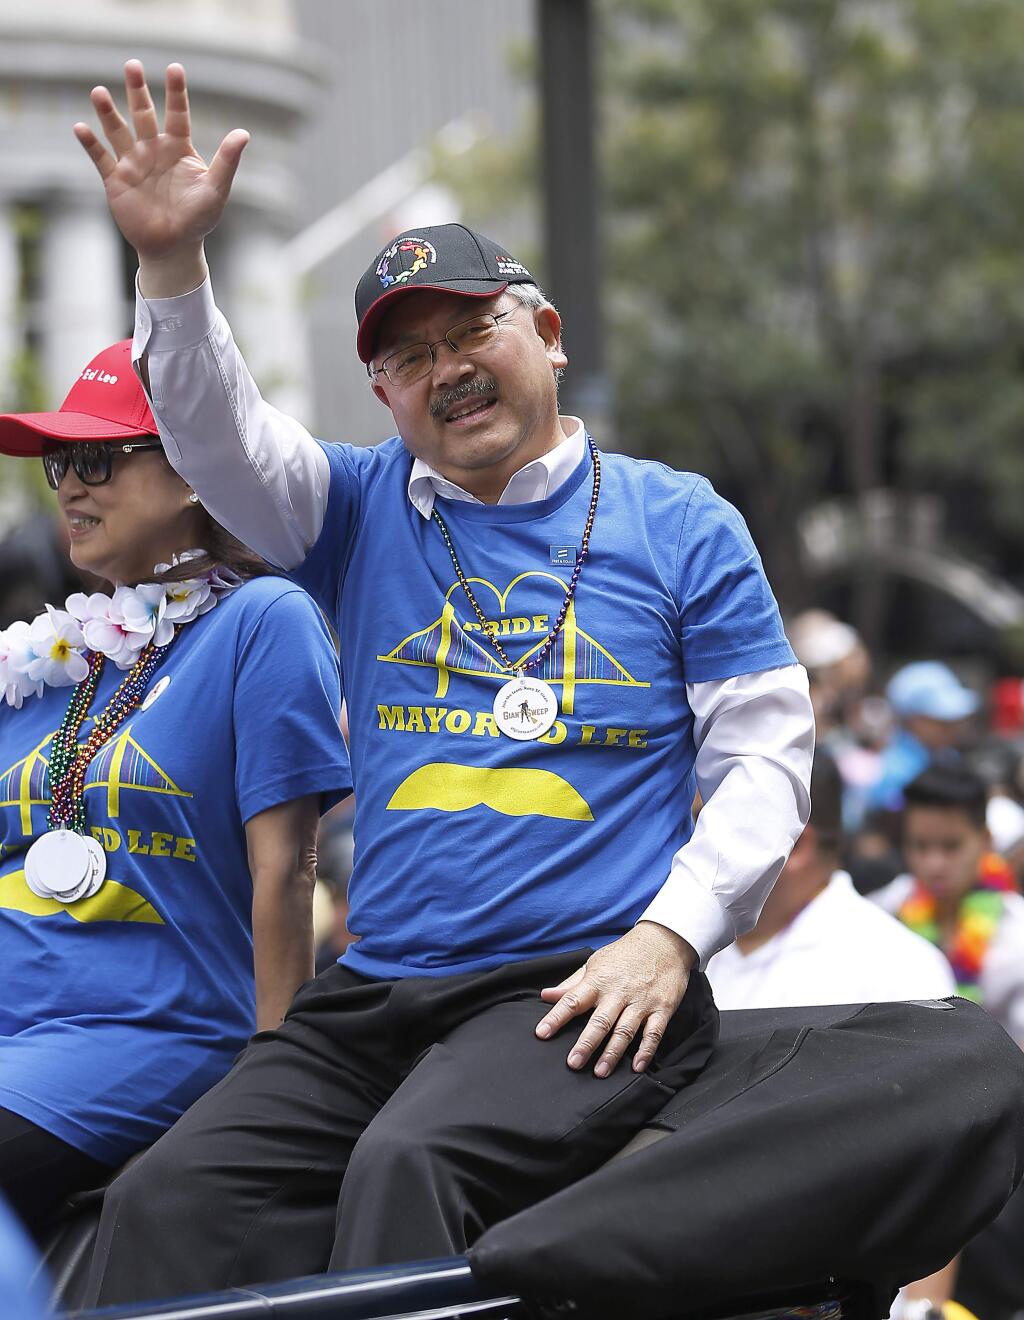 San Francisco Mayor Ed Lee waves during the 45th annual San Francisco Gay Pride parade Sunday, June 28, 2015, in San Francisco. A large turnout was expected for gay pride parades across the U.S. following the landmark Supreme Court ruling that said gay couples can marry anywhere in the country. (AP Photo/ Tony Avelar)